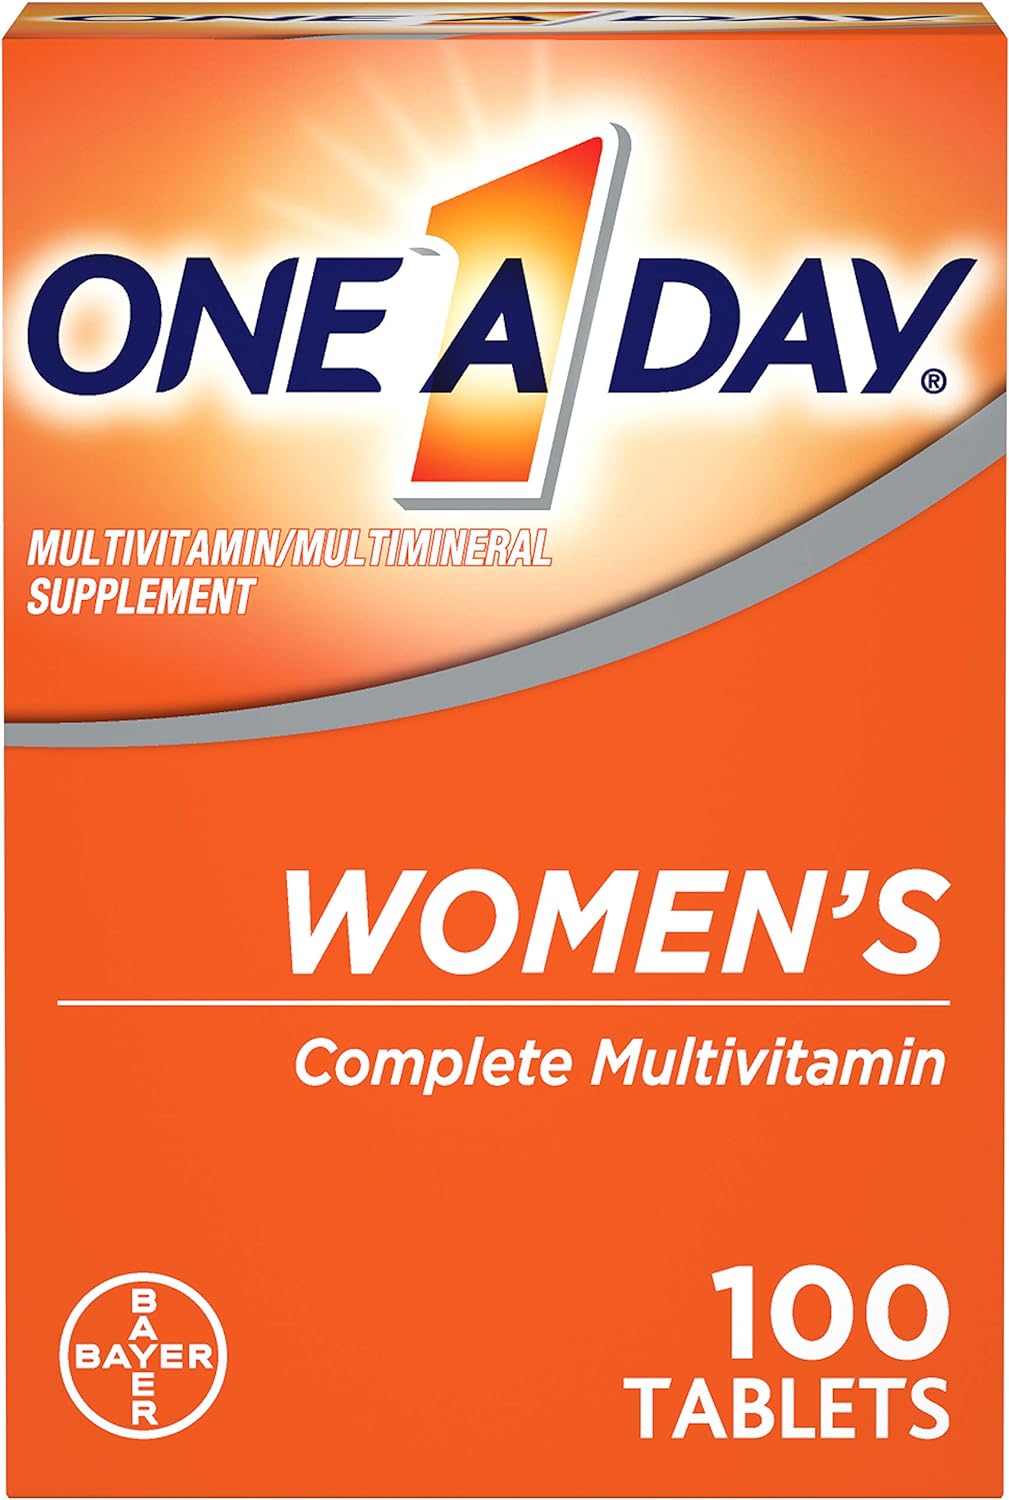 One A Day Women’s Multivitamin, Supplement with Vitamin A, Vitamin C, Vitamin D, Vitamin E and Zinc for Immune Health Support, B12, Biotin, Calcium  More, Tablet, 100 count